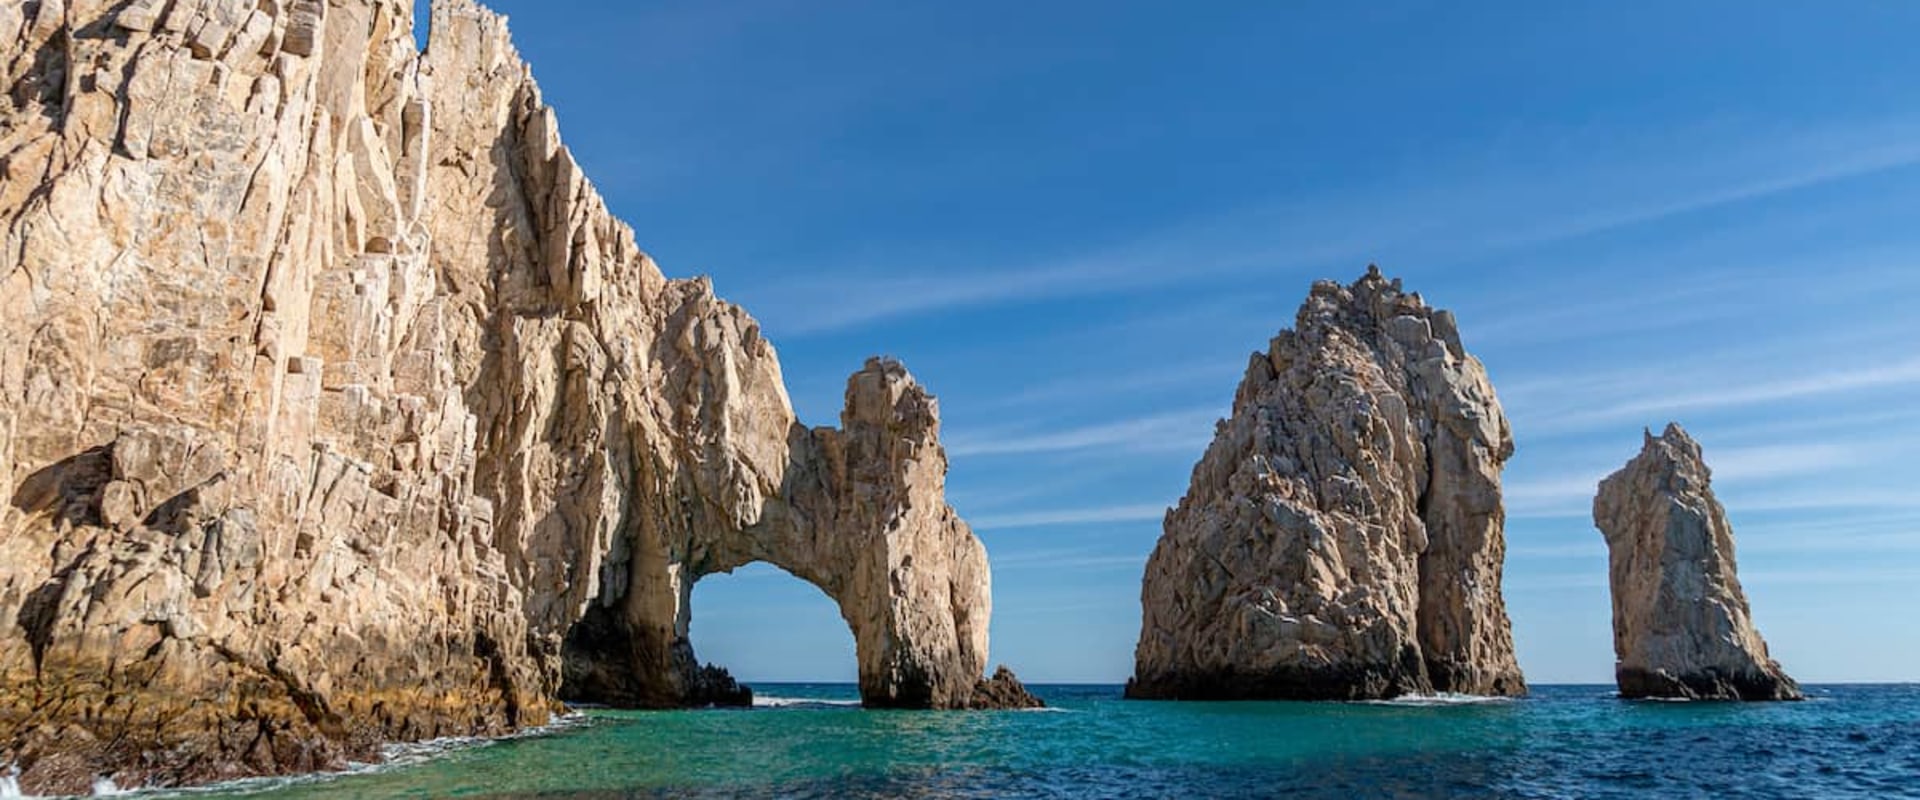 Why is Cabo San Lucas Mexico So Popular?